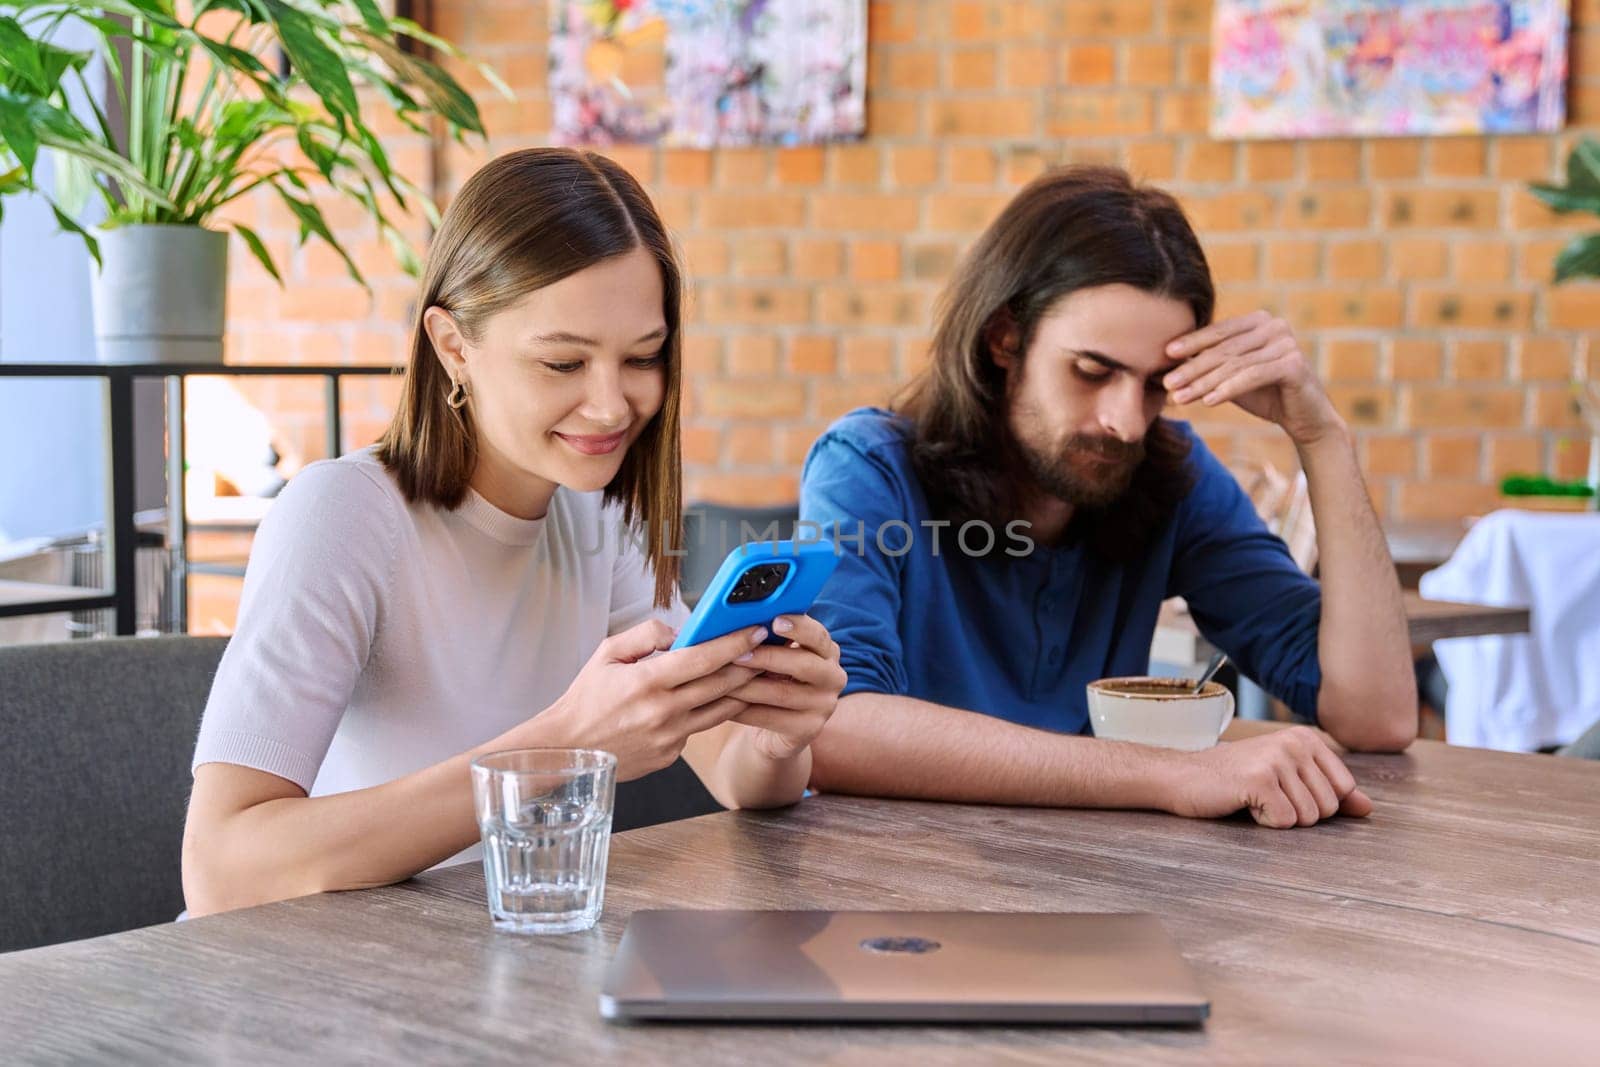 Young handsome people friends, couple man and woman relaxing together in a cafe, using smartphone, drinking coffee. Lifestyle, leisure, youth concept